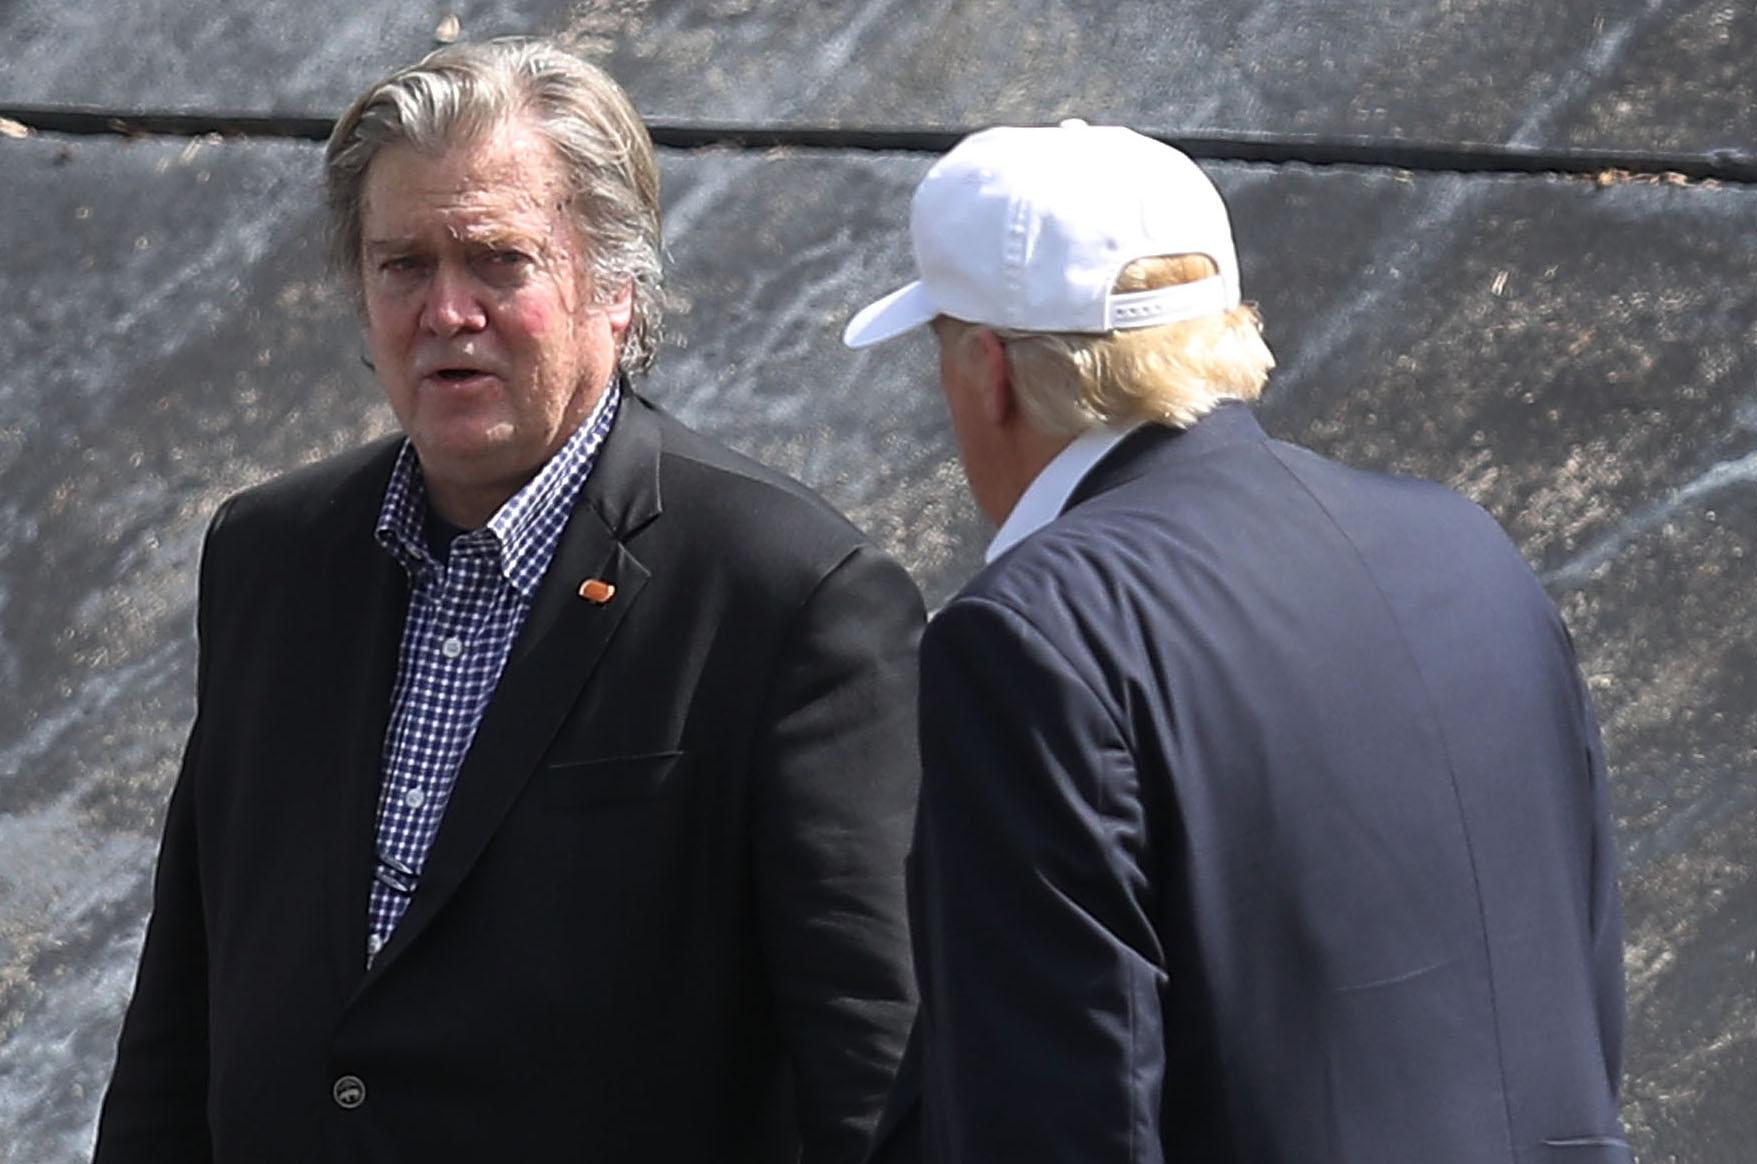 Steve Bannon has been accused of supporting white nationalist views Getty